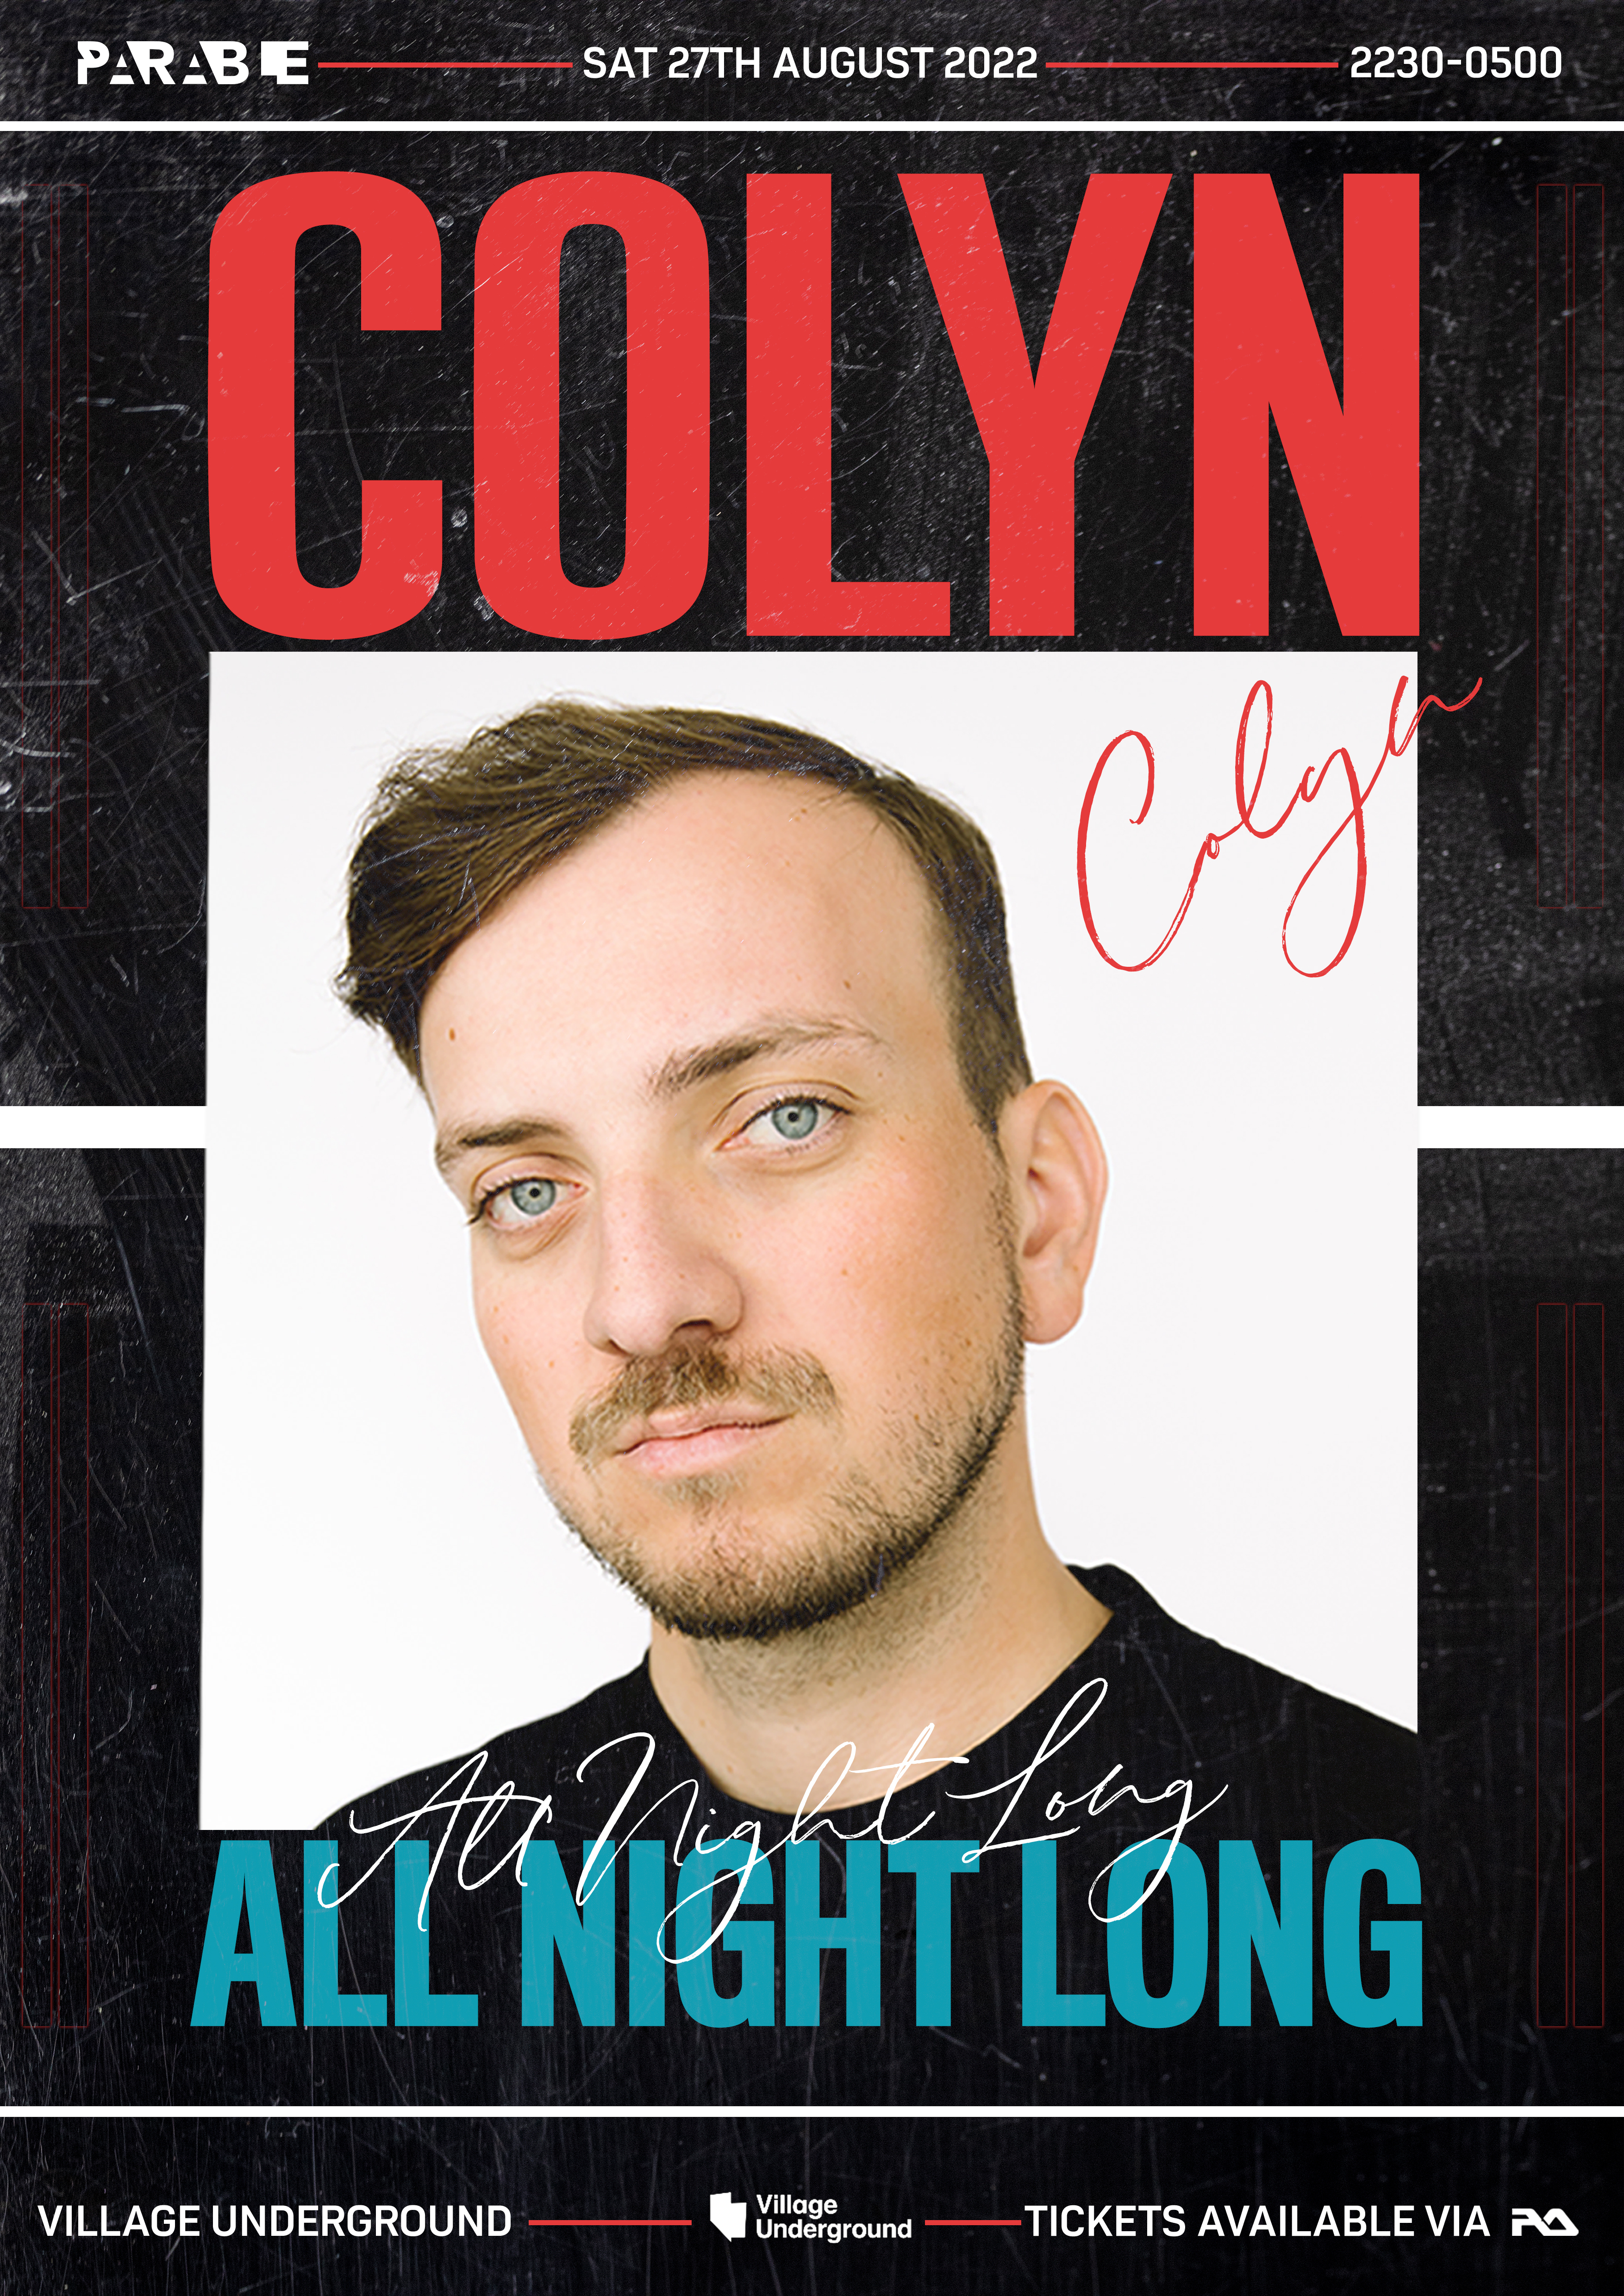 Colyn All Night Long - Flyer front